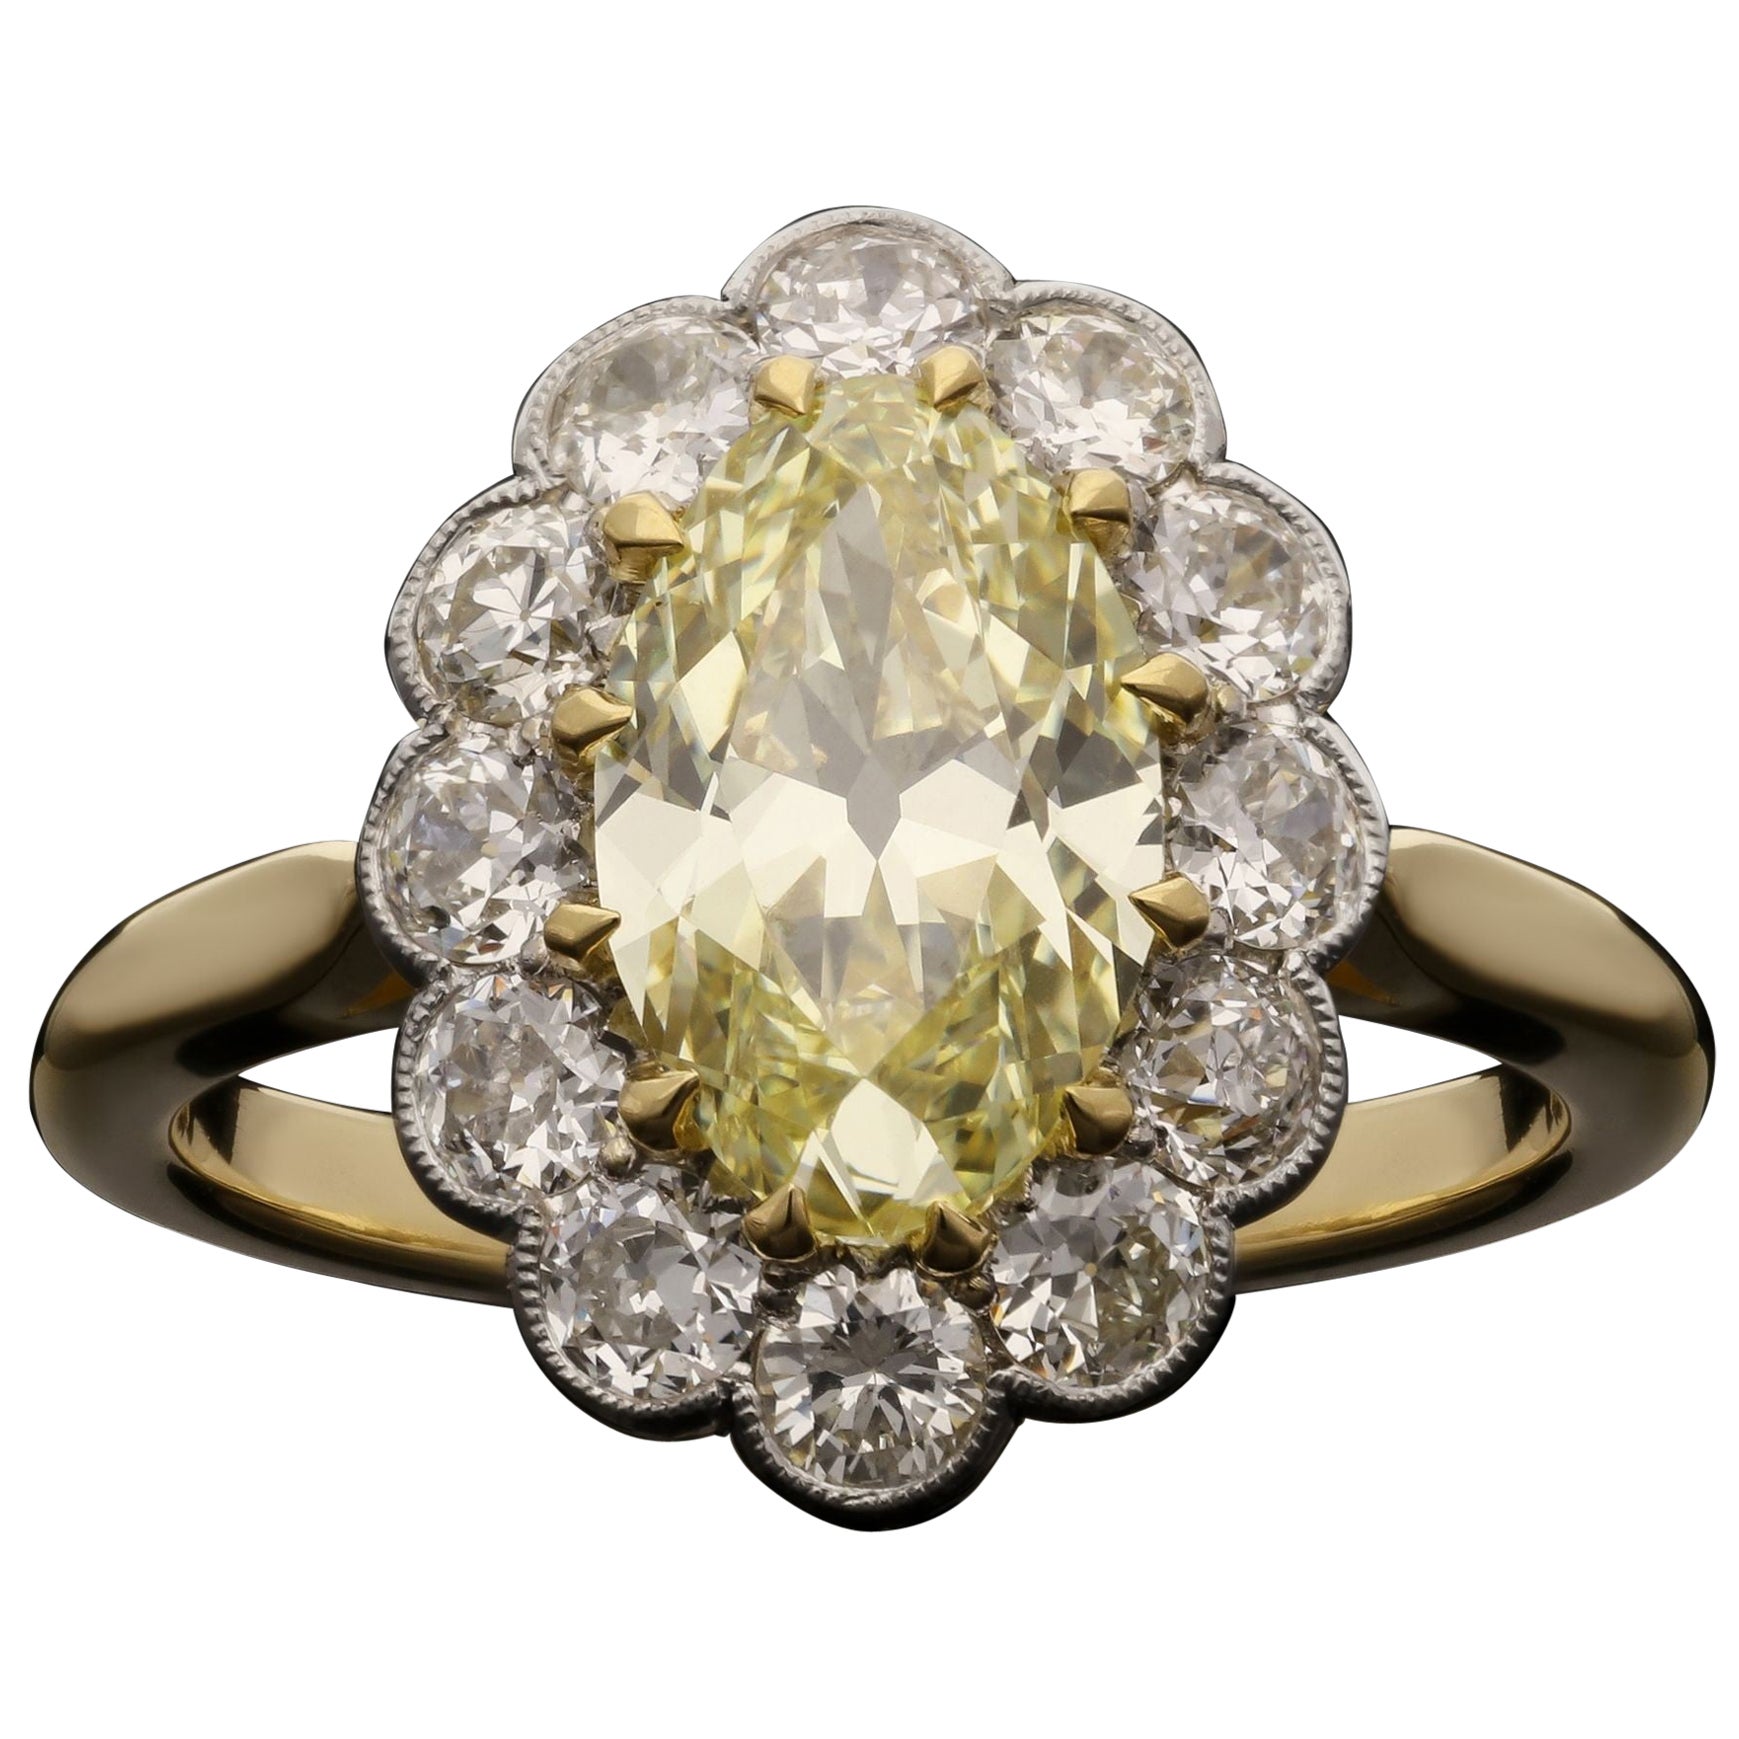 Hancocks 1.83ct Fancy Yellow Moval Diamond Cluster Ring in 18ct Yellow Gold For Sale